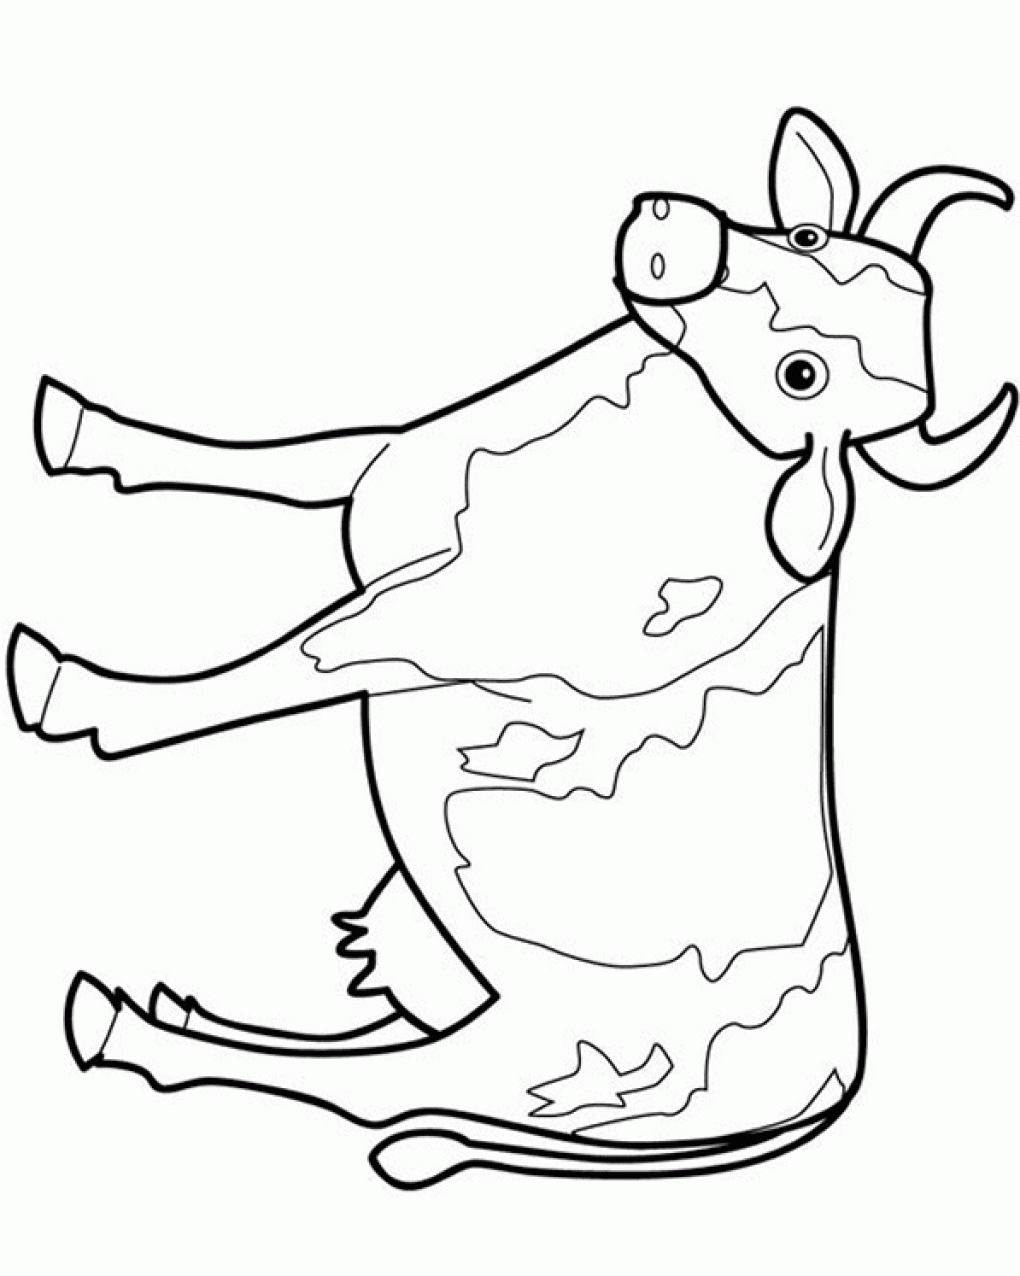 Cow coloring pages for kids - Coloring Pages  Pictures - IMAGIXS